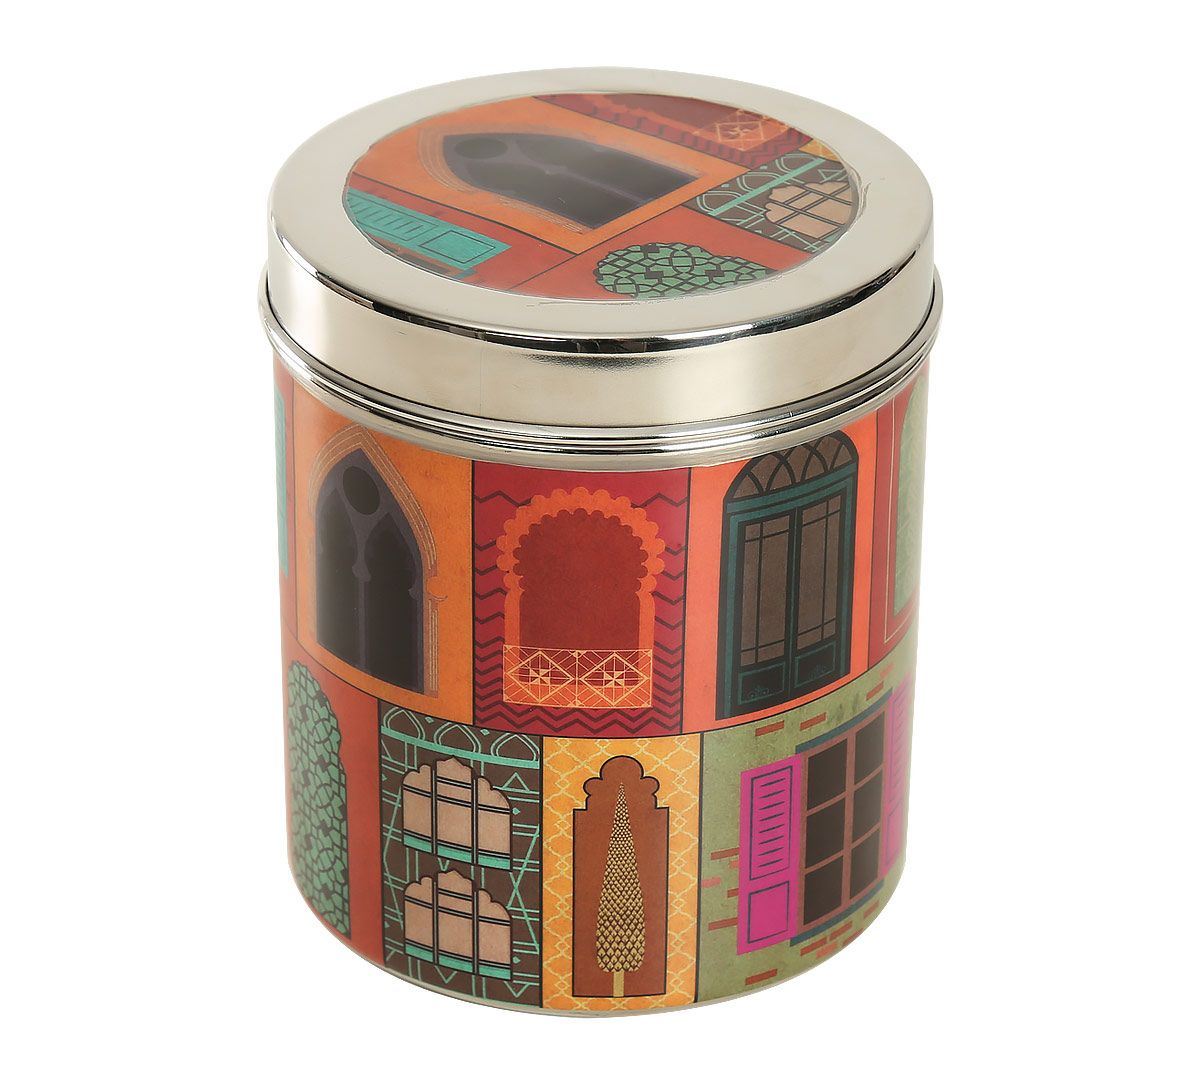 India Circus by Krsnaa Mehta Mughal Doors Reiteration Steel Container Set of 3